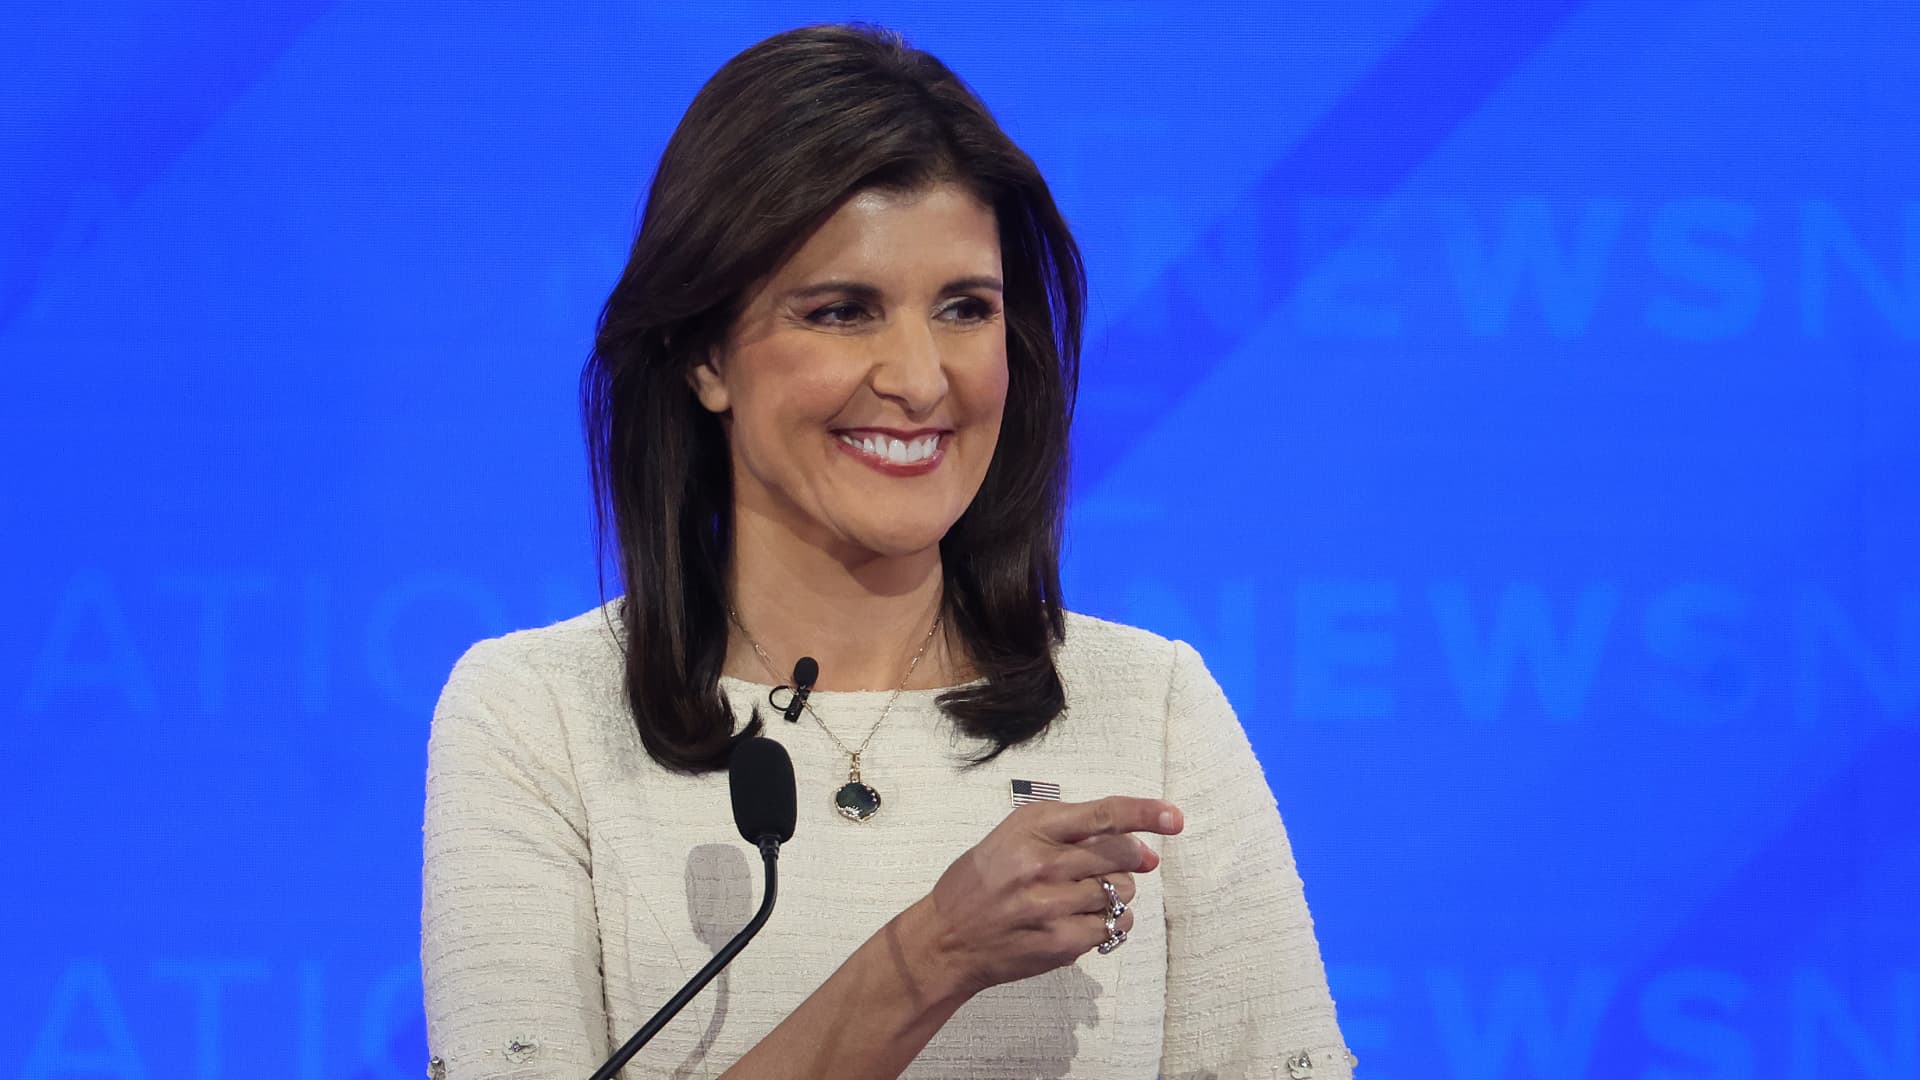 Republican debate first test she needed to ace